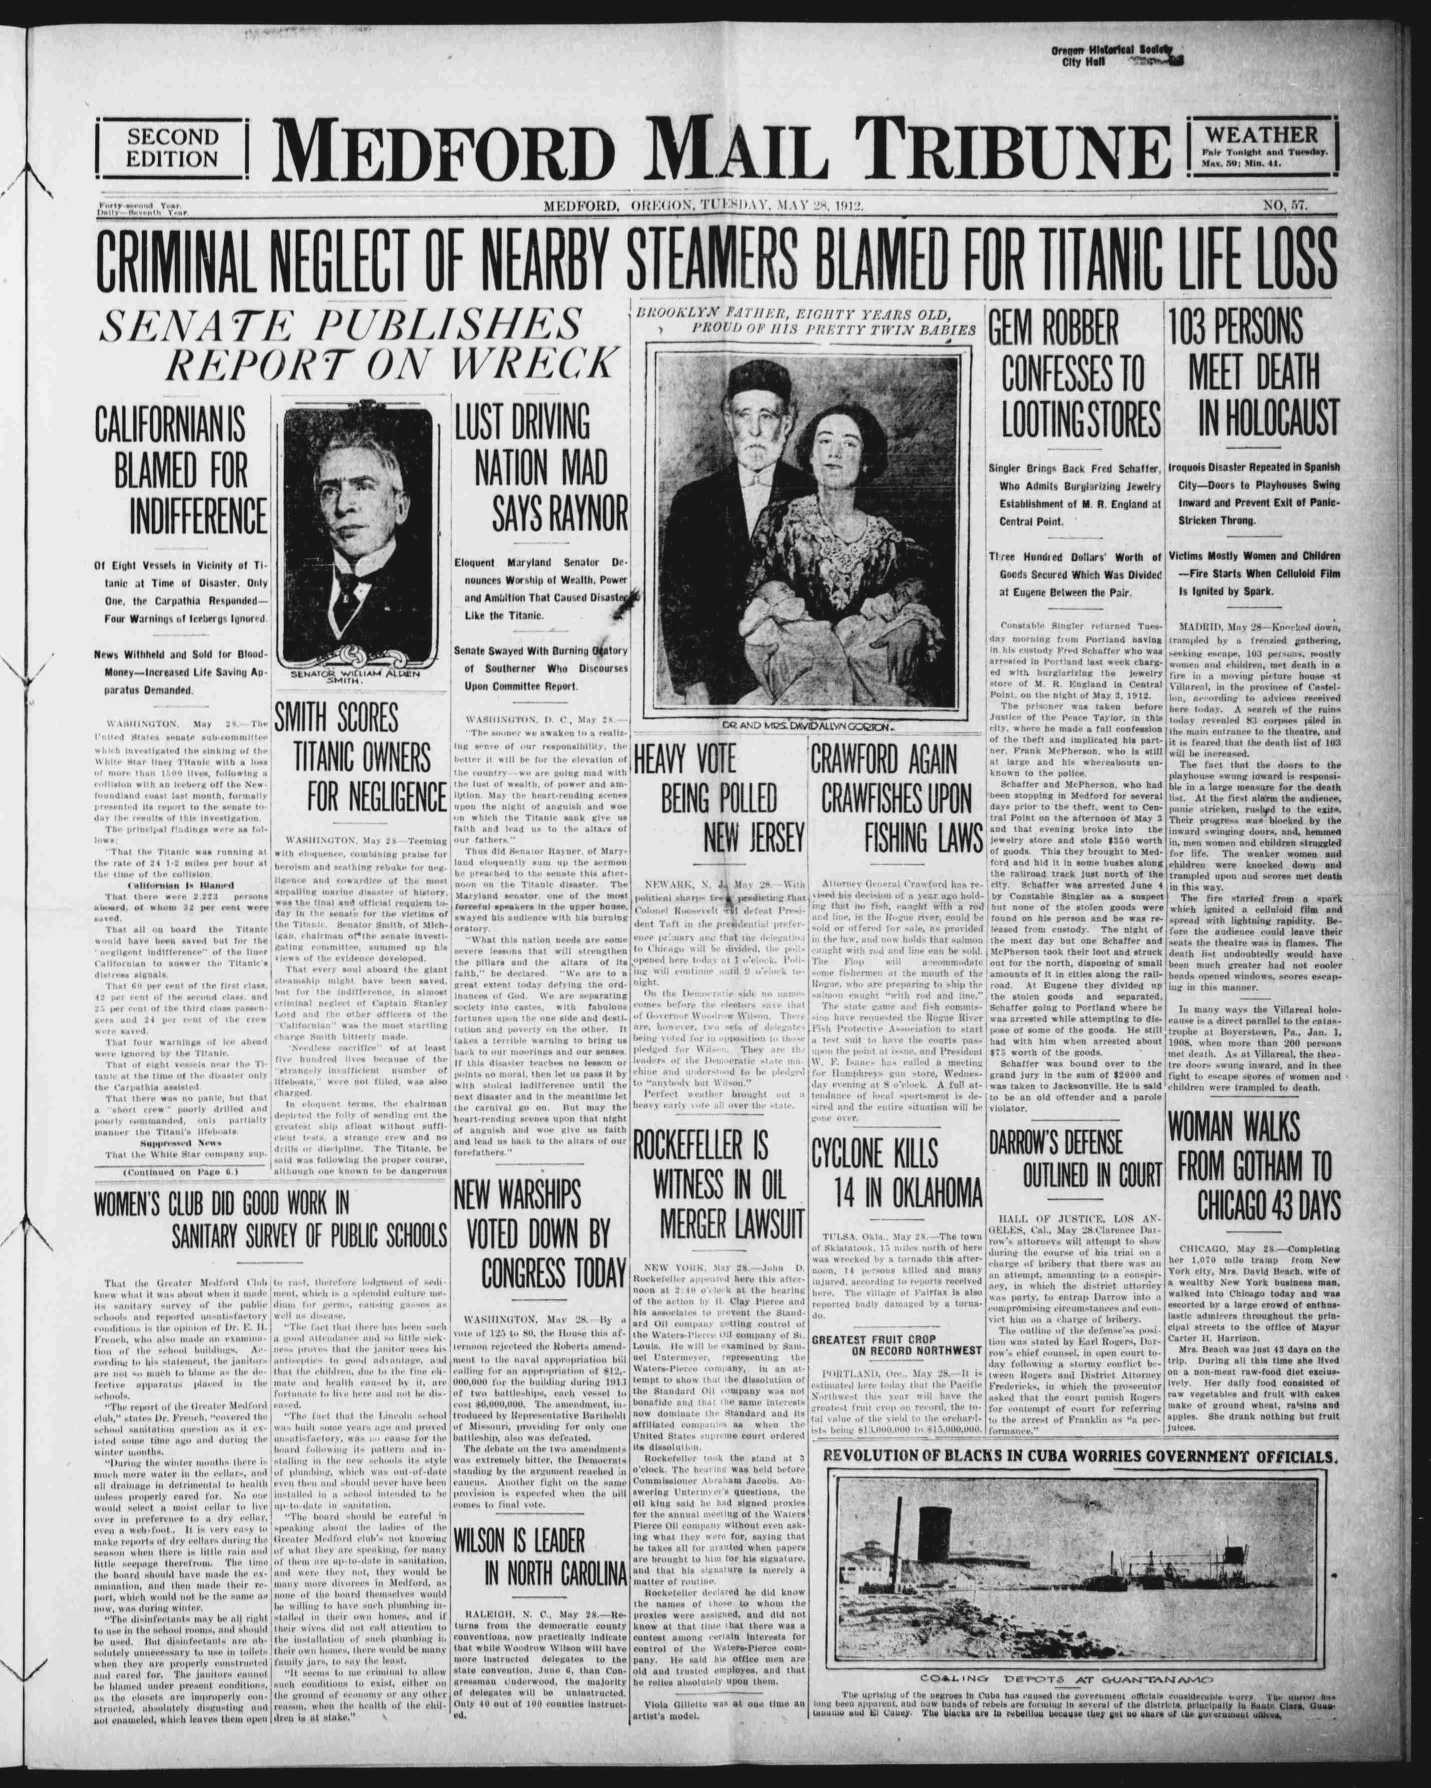 Titanic Newpaper Front Page 1912-05-28 Medford Mail Tribune, May 28, 1912, SECOND EDITION, Page 1